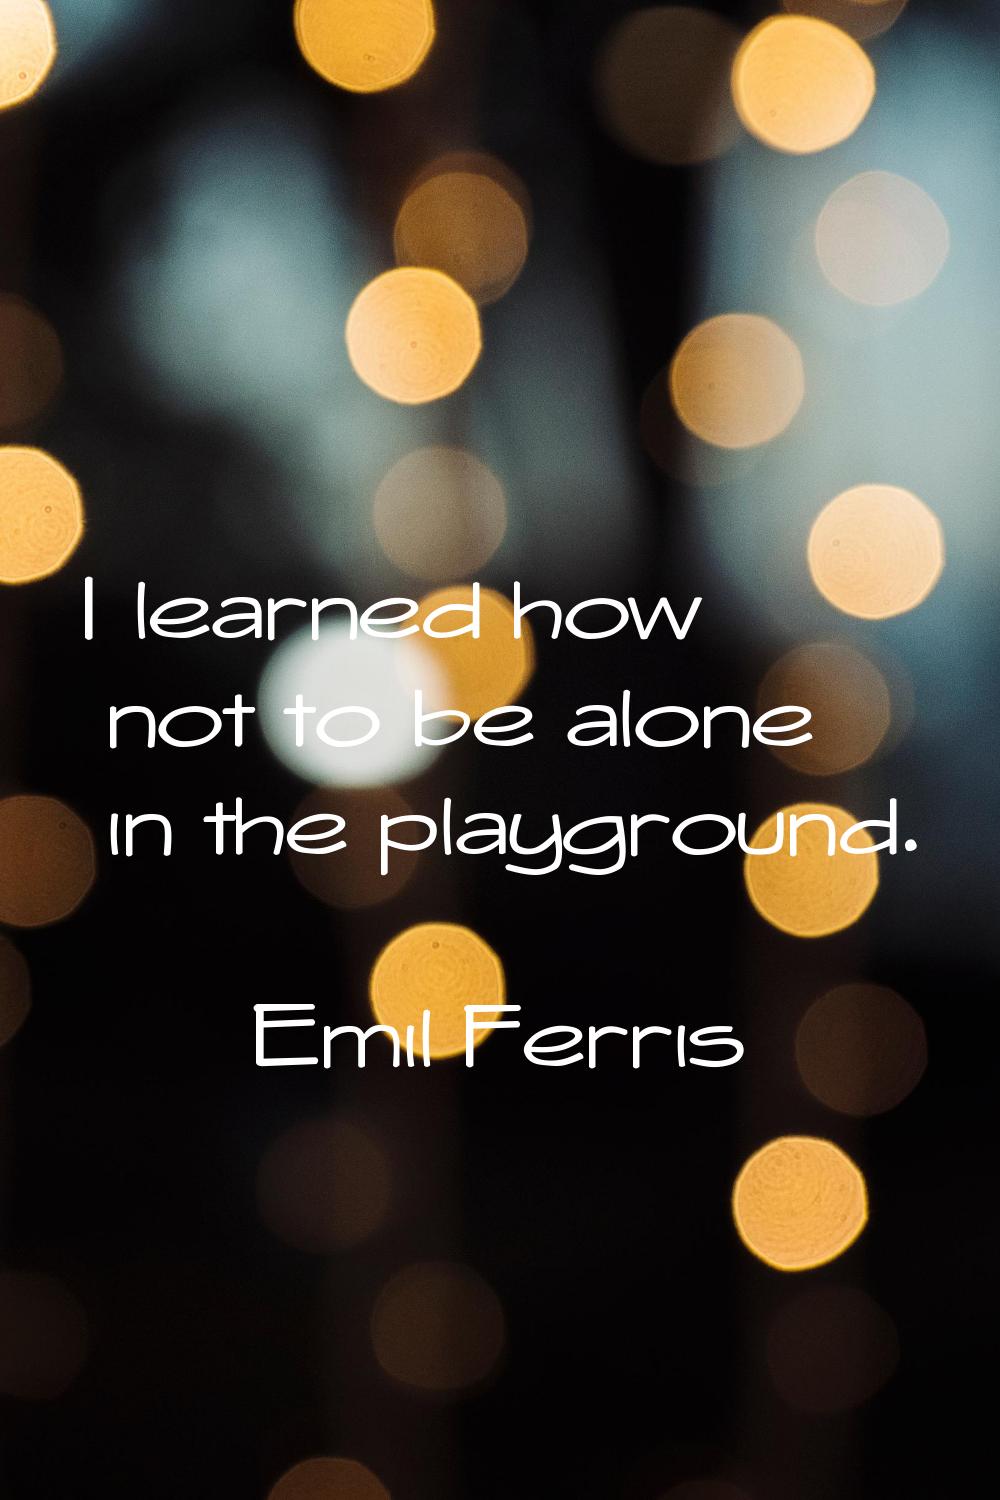 I learned how not to be alone in the playground.